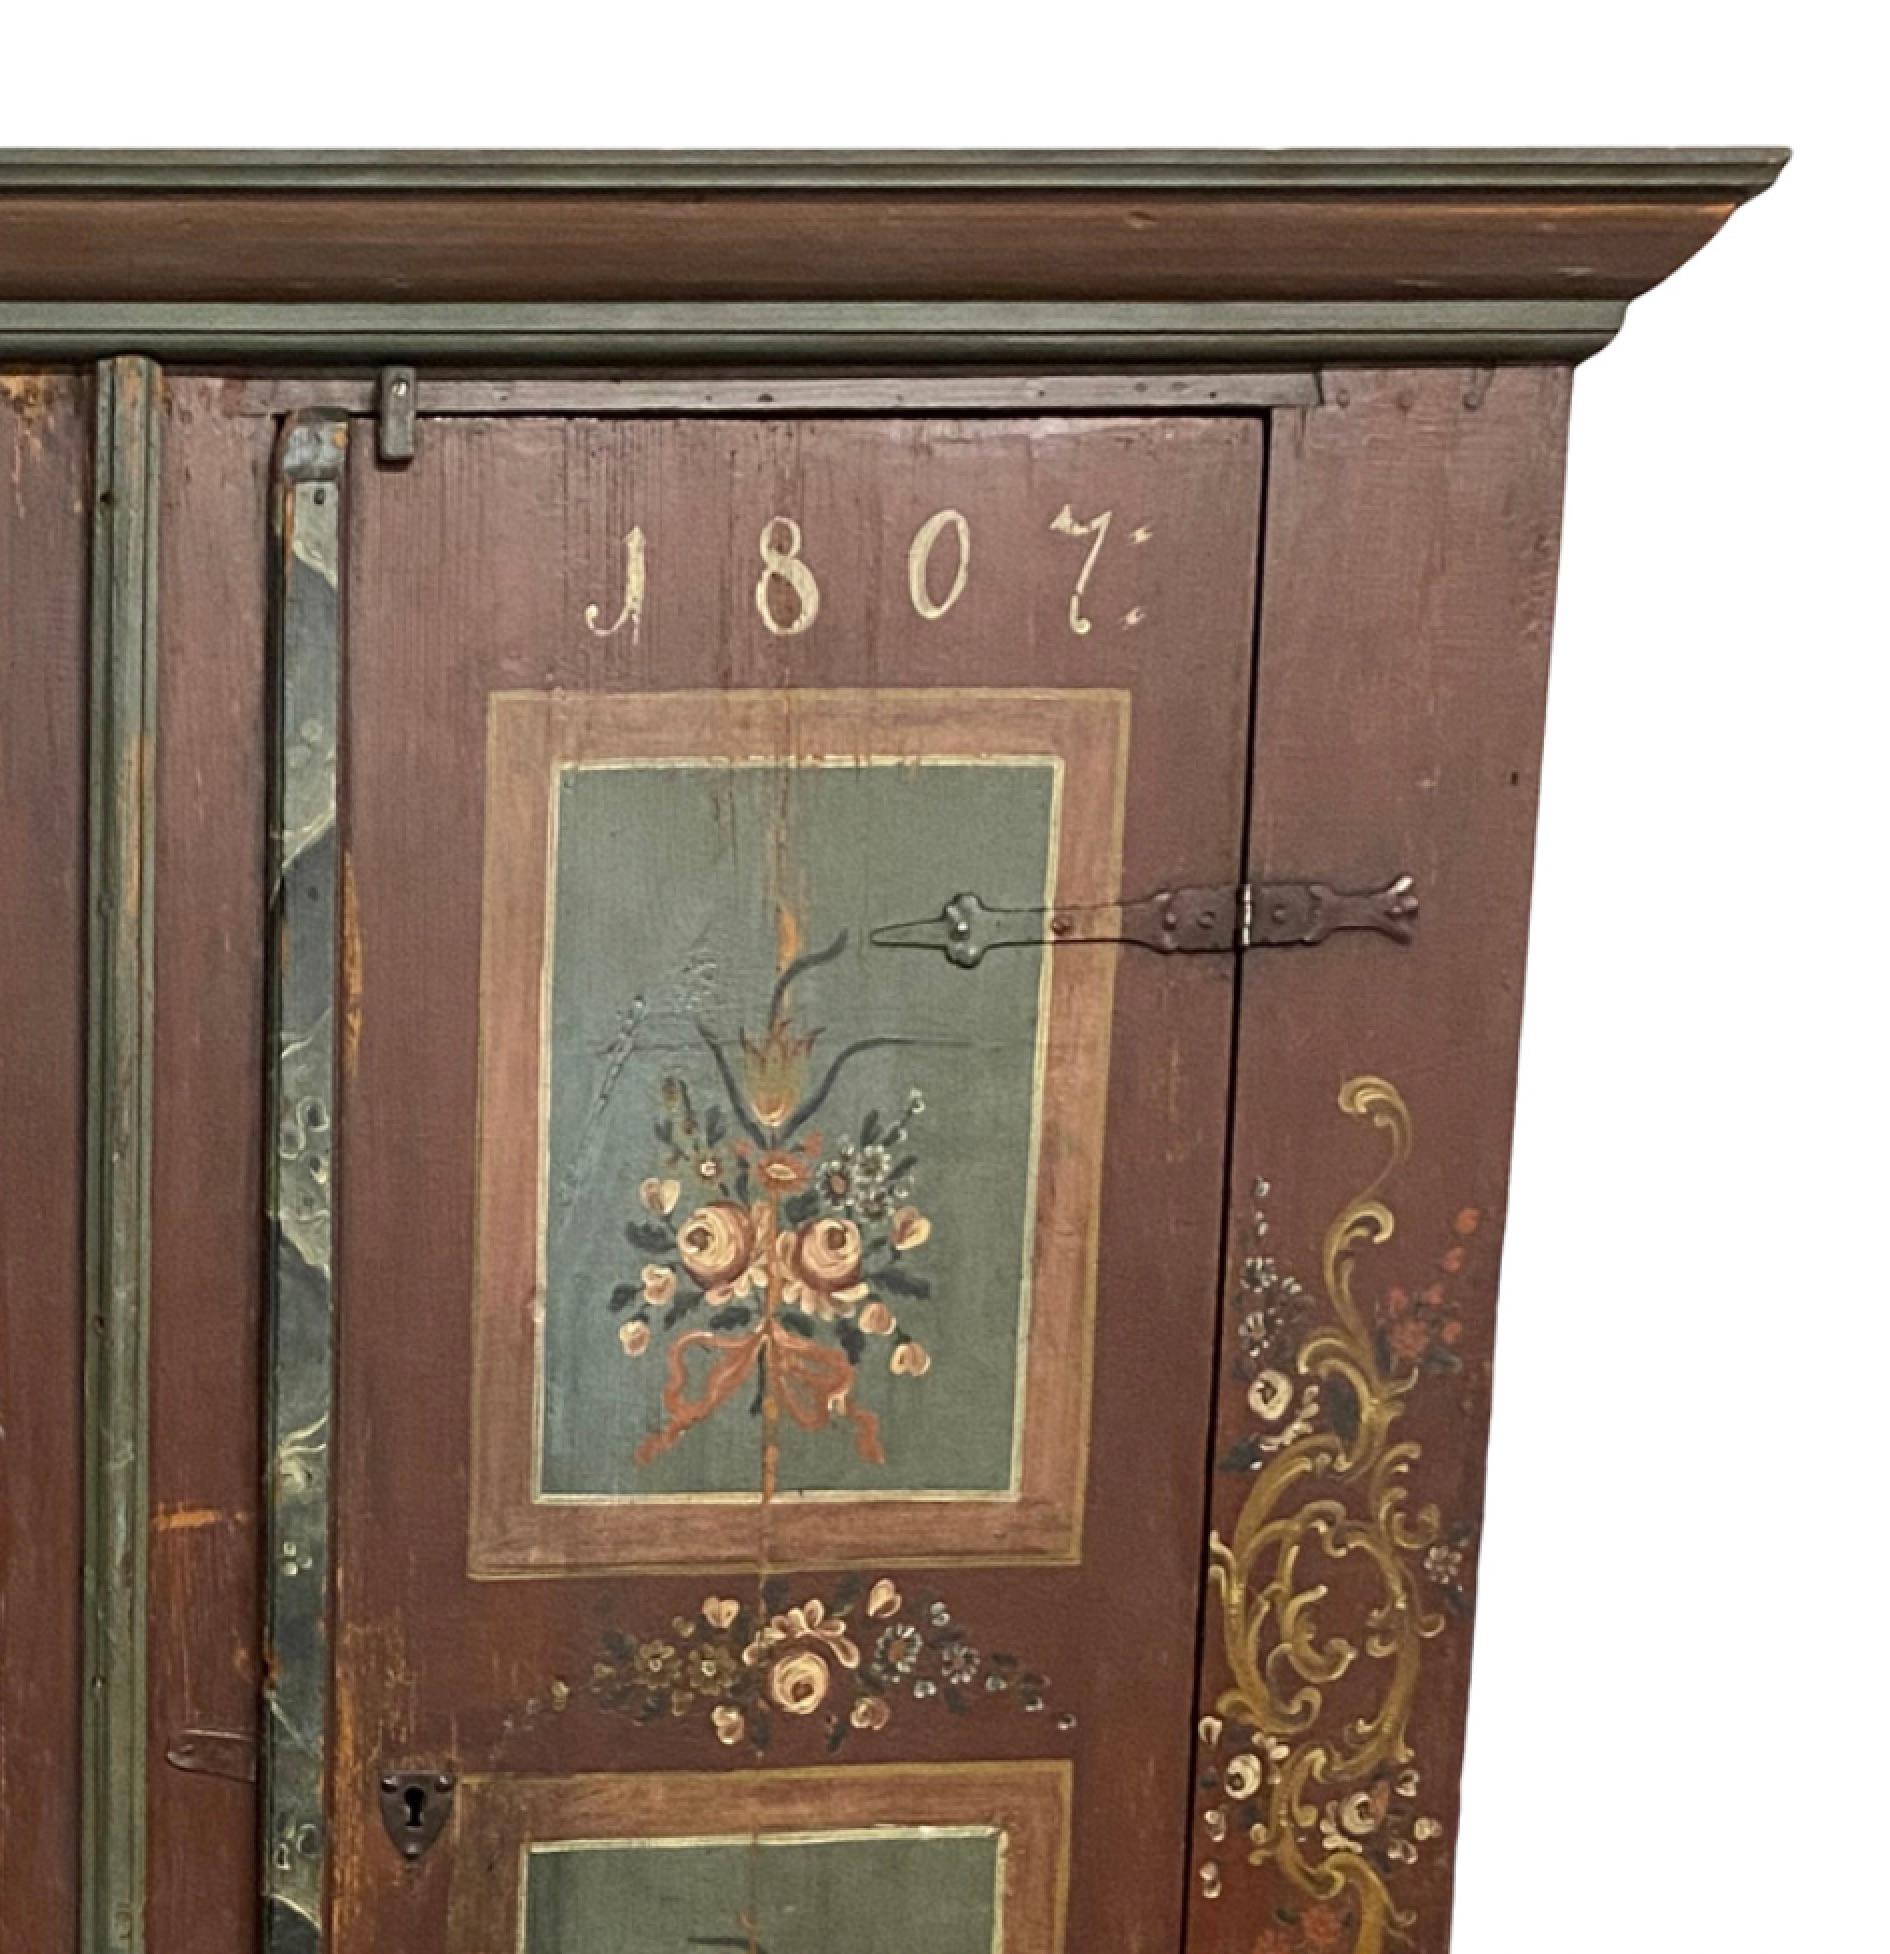 Hand painted burgundy and teal wedding armoire with initials “F.R.S.”

Dated “1807”

77.5″H x 21″D x 73″W